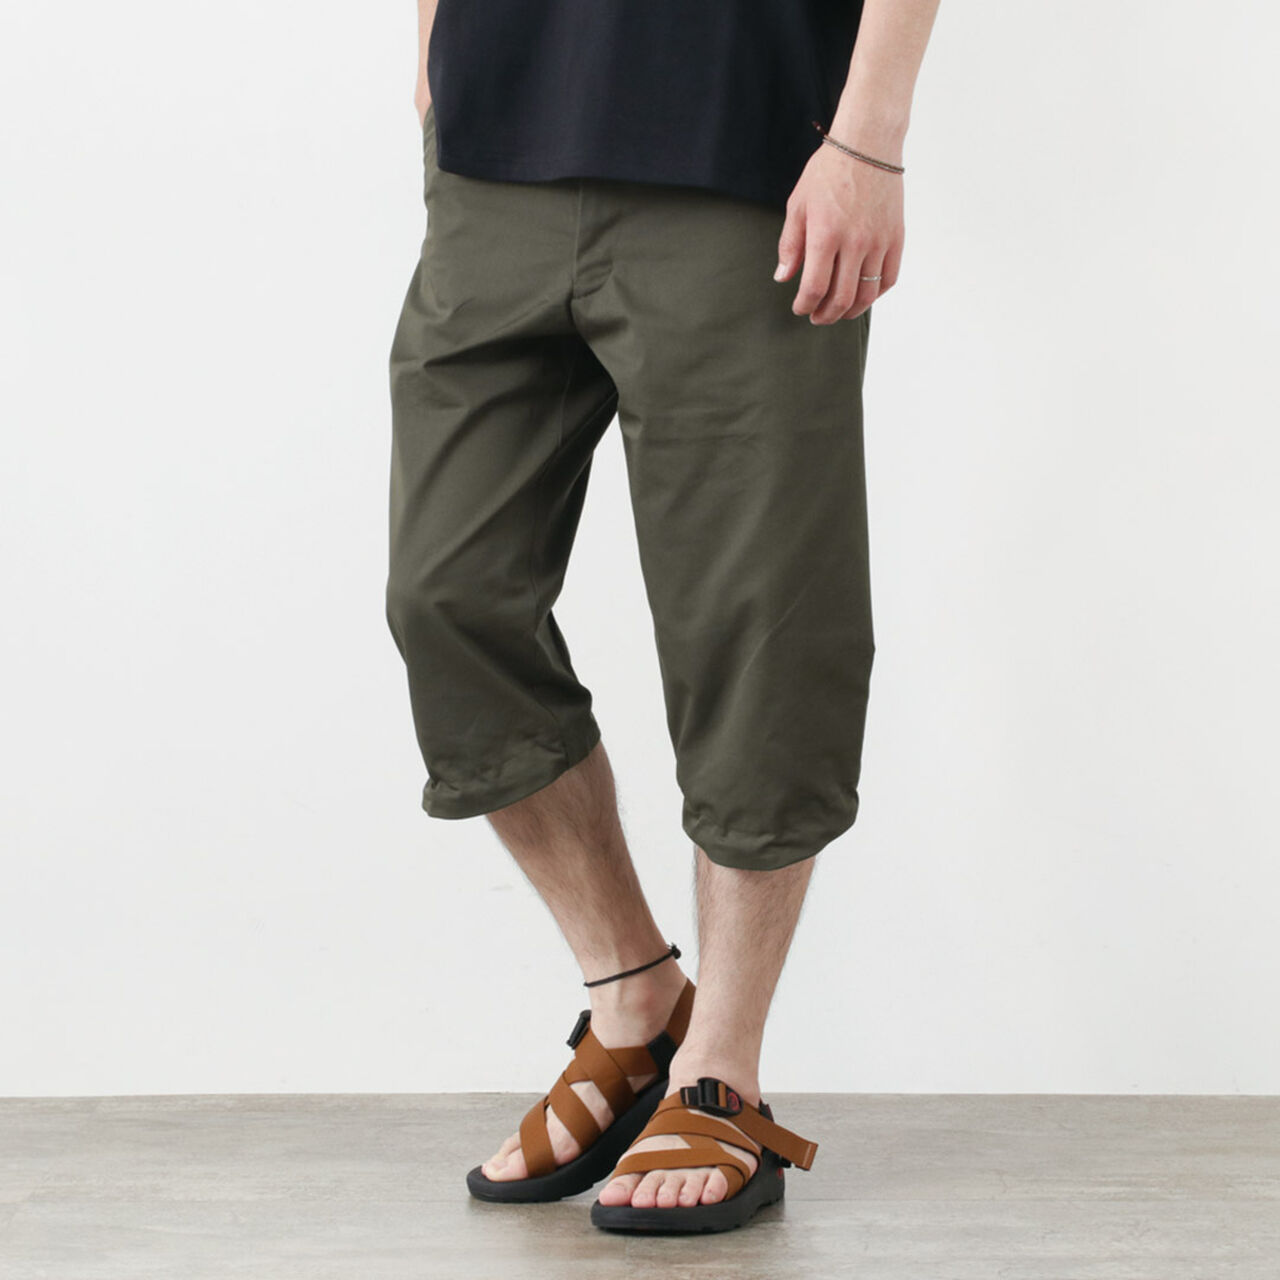 Go Out Cropped Pants,Olive, large image number 0